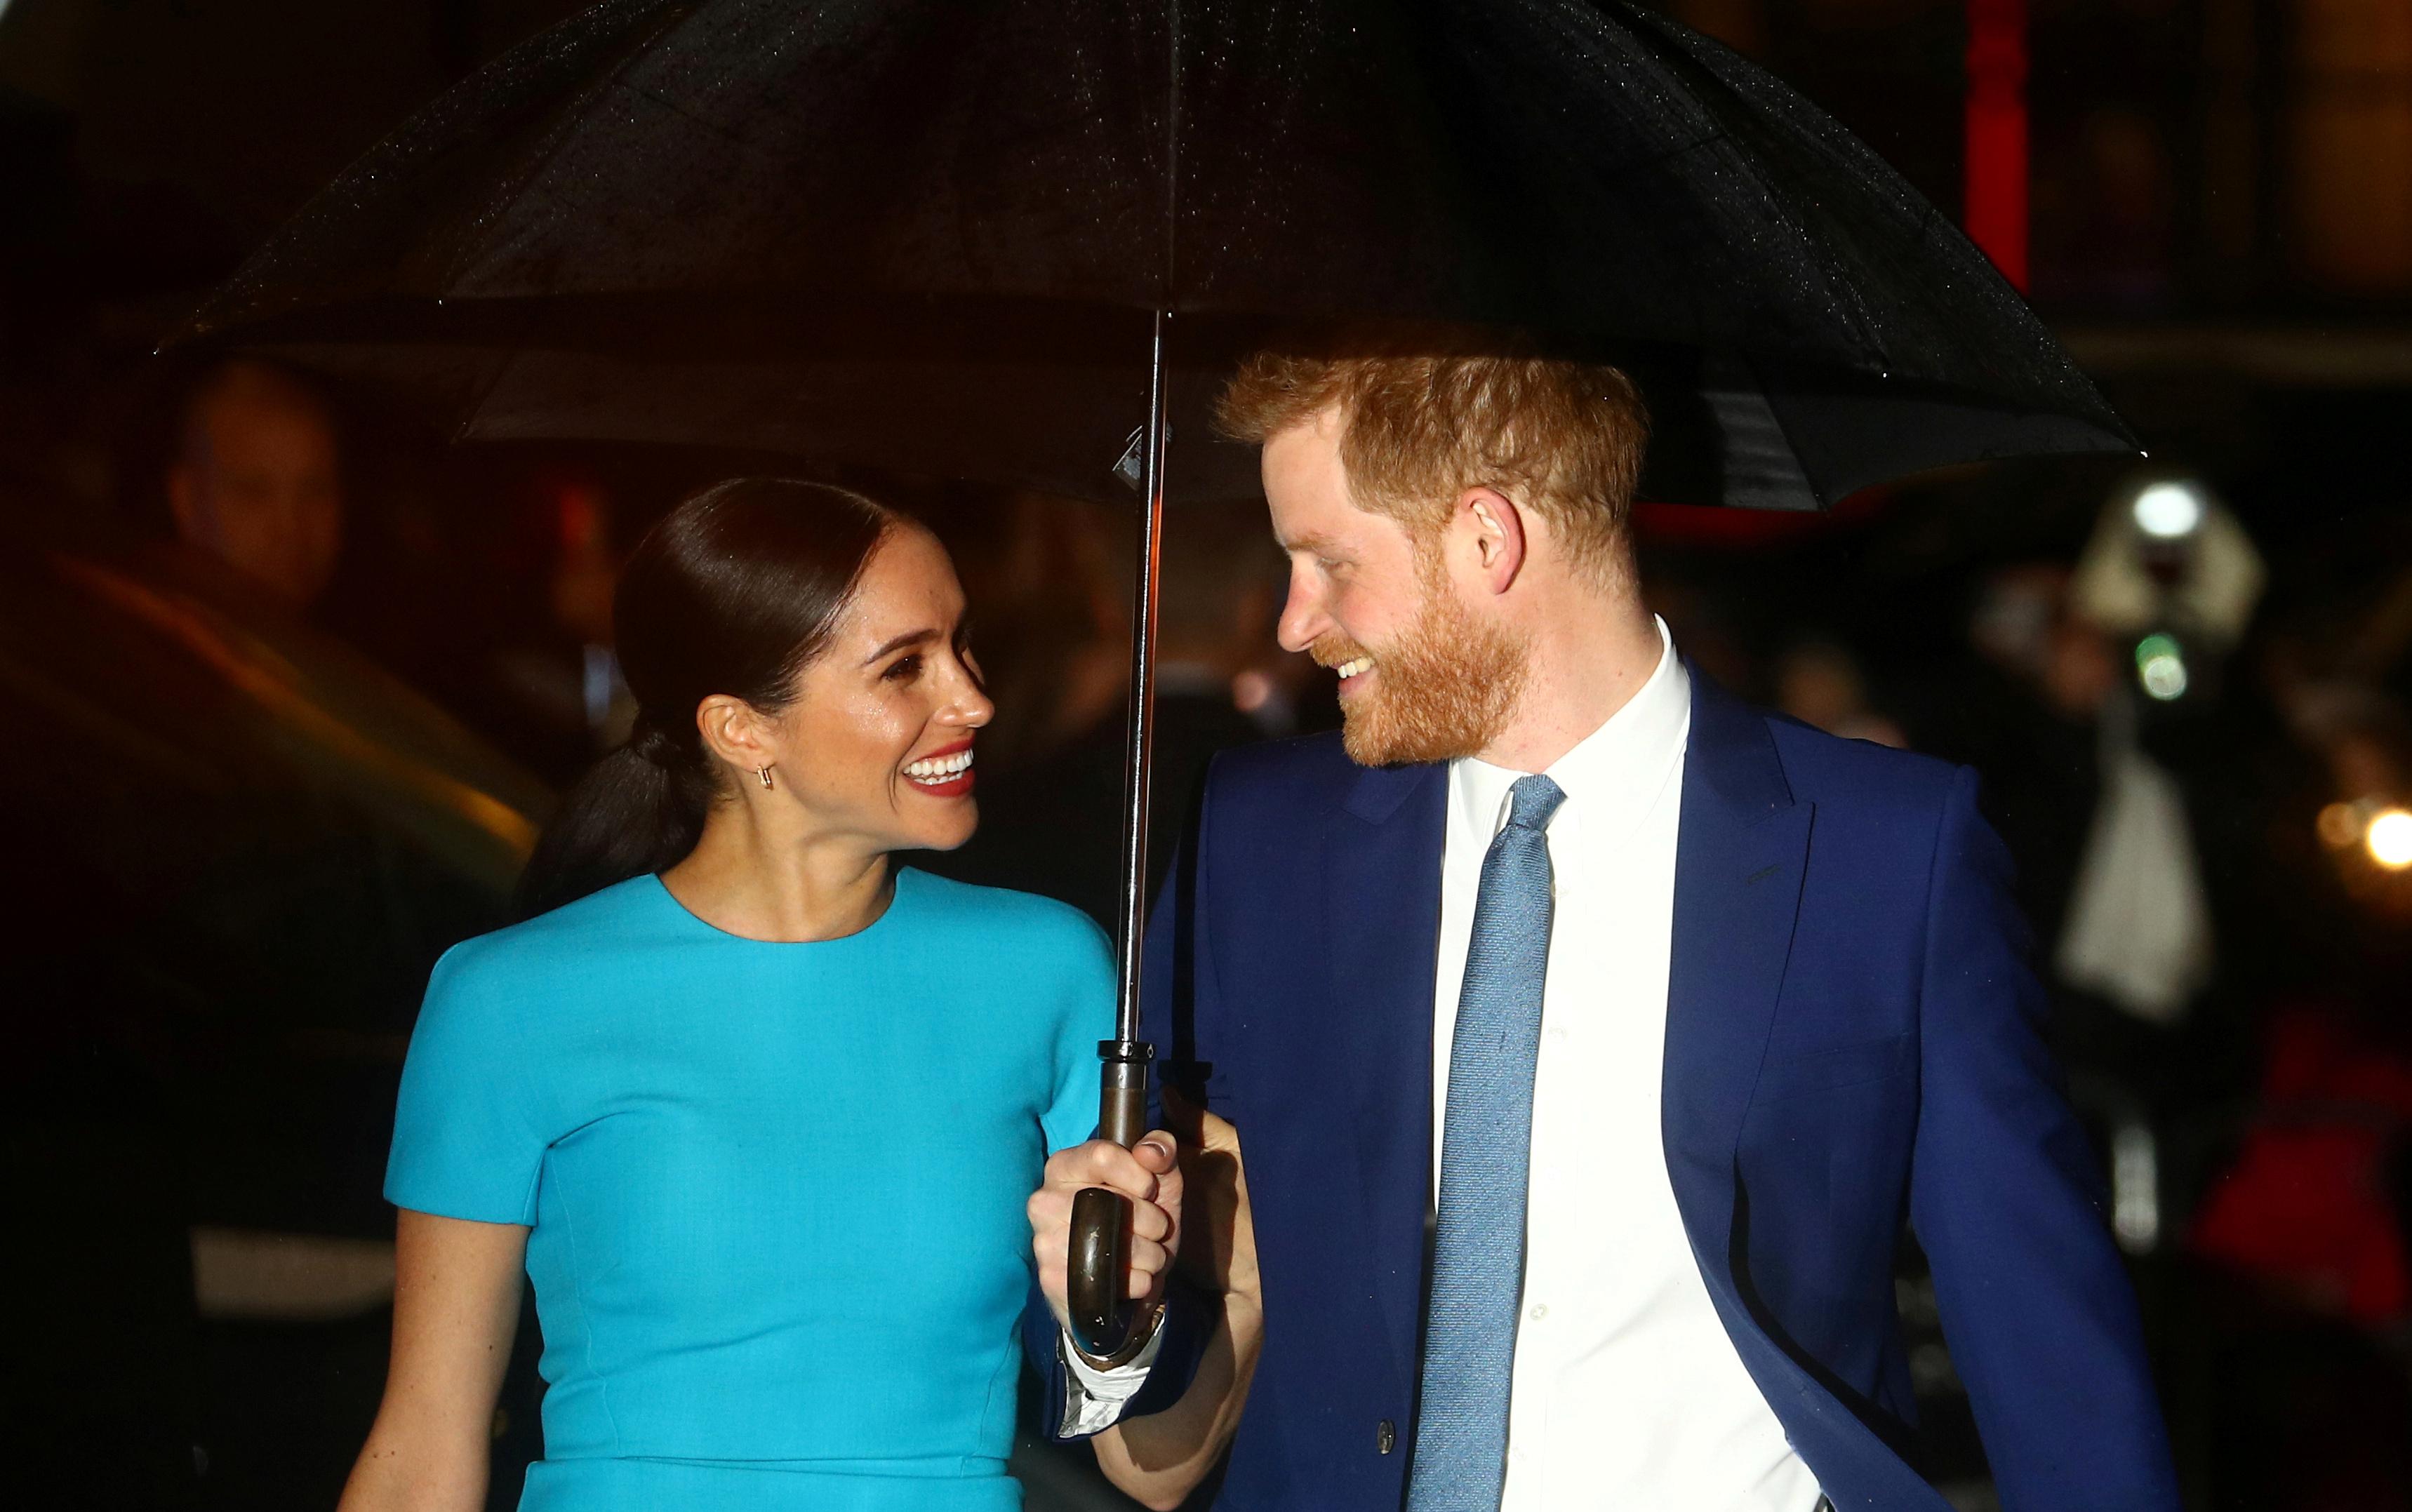 Britain's Prince Harry and his wife Meghan, Duchess of Sussex, arrive at the Endeavour Fund Awards in London, Britain March 5, 2020. REUTERS/Hannah McKay 